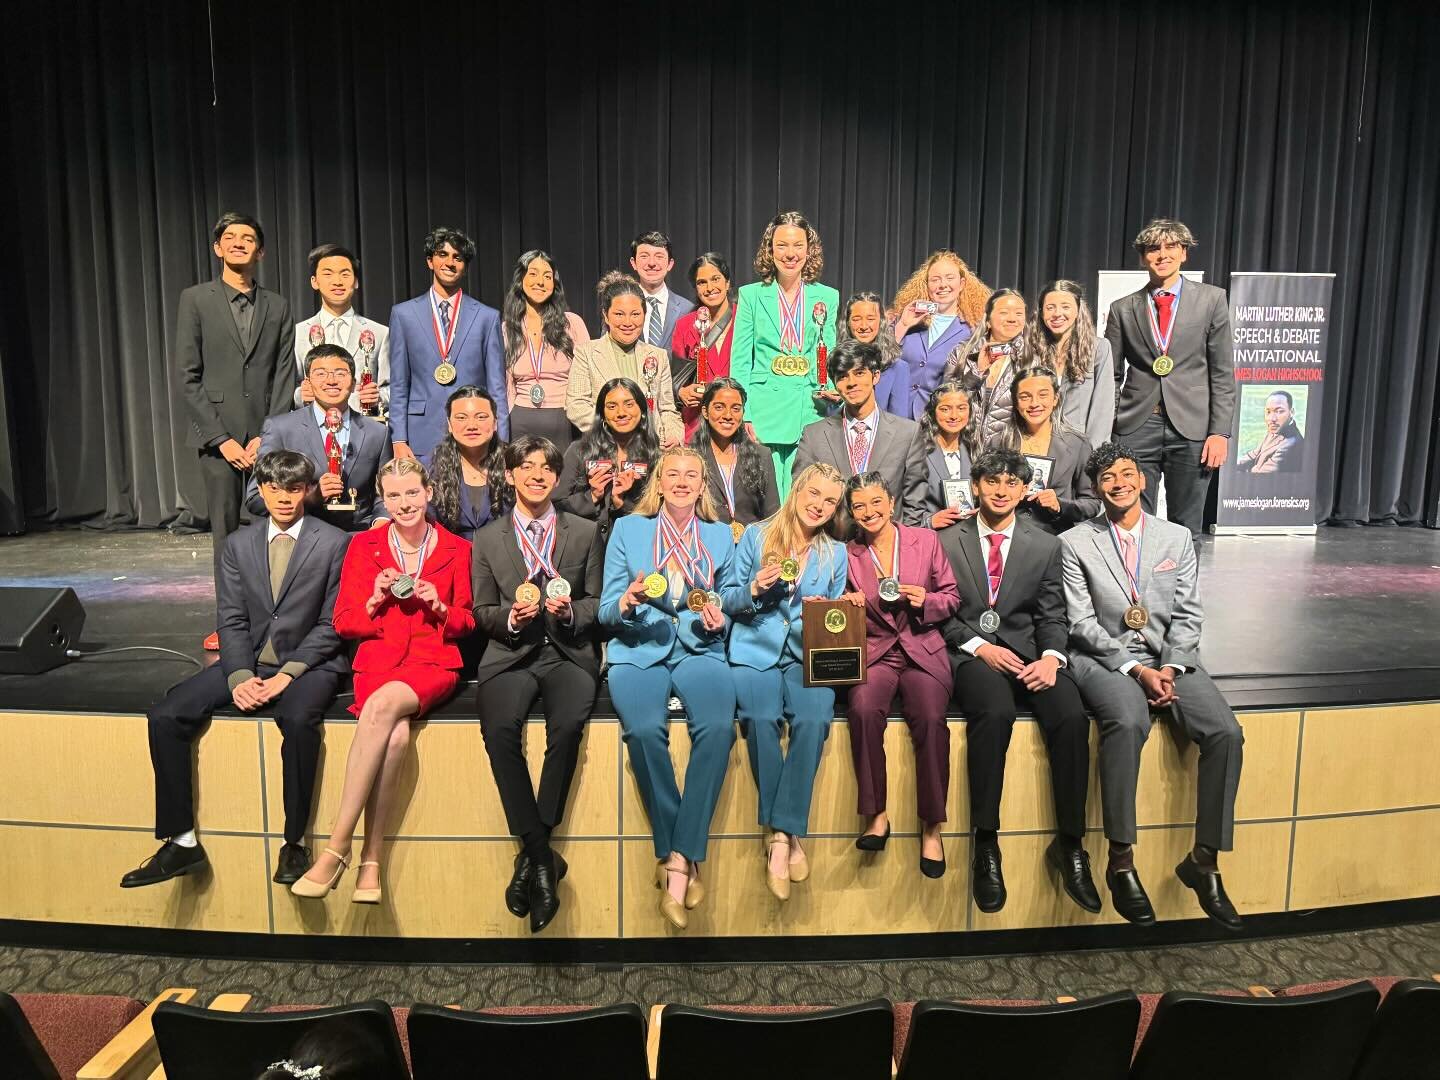 This past weekend 83 members of our Speech and Debate team competed at the Martin Luther King Jr. Invitational at James Logan High School in Union City. This tournament was created 32 years ago by Dr. Tommie Lindsey Jr. to honor Dr. King with an even